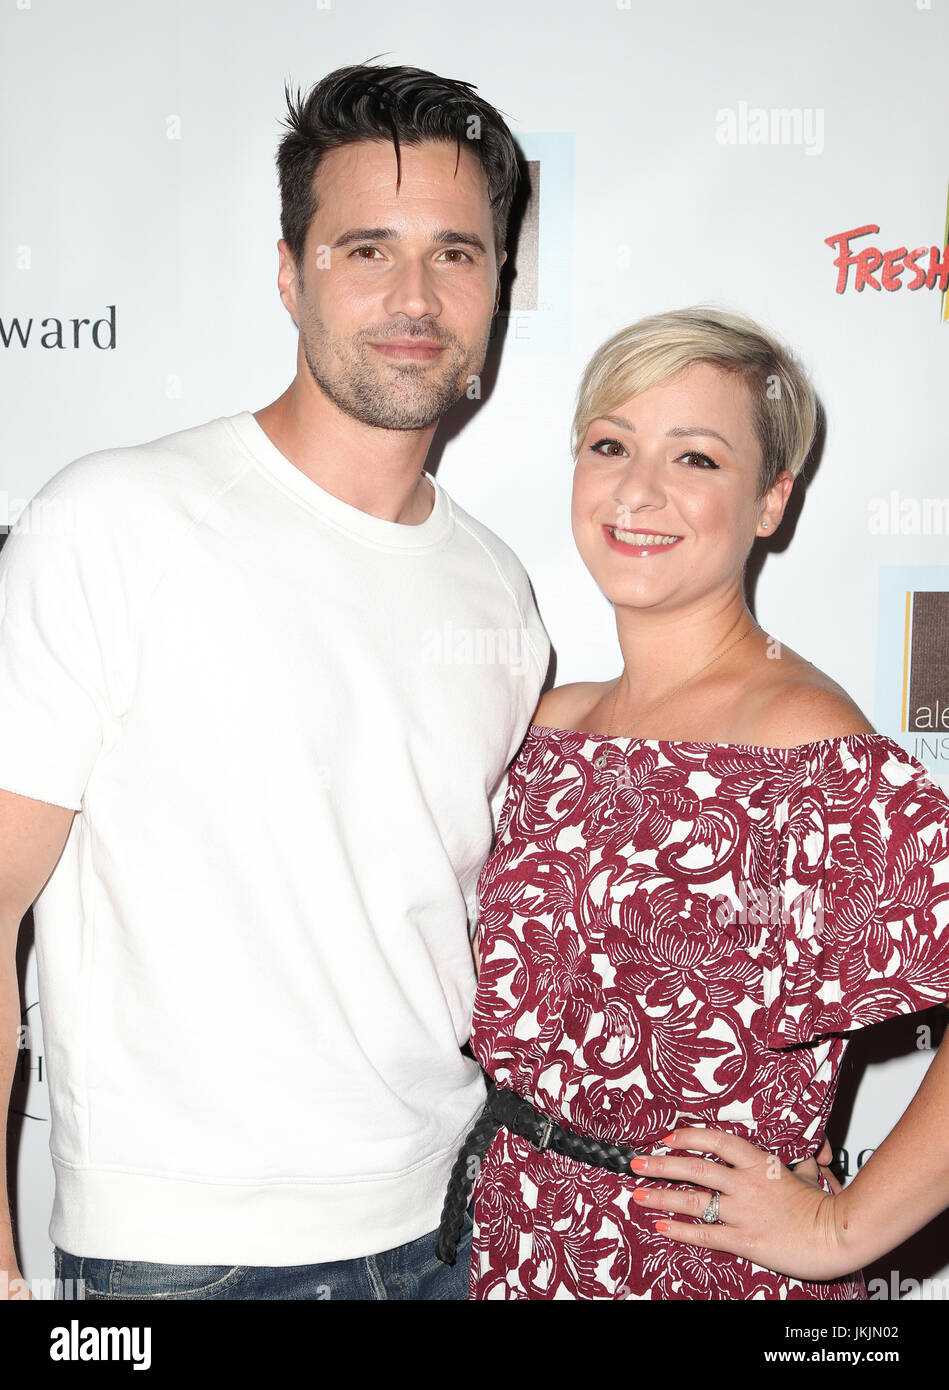 Brett Dalton And Melissa Trn High Resolution Stock Photography and Images -  Alamy